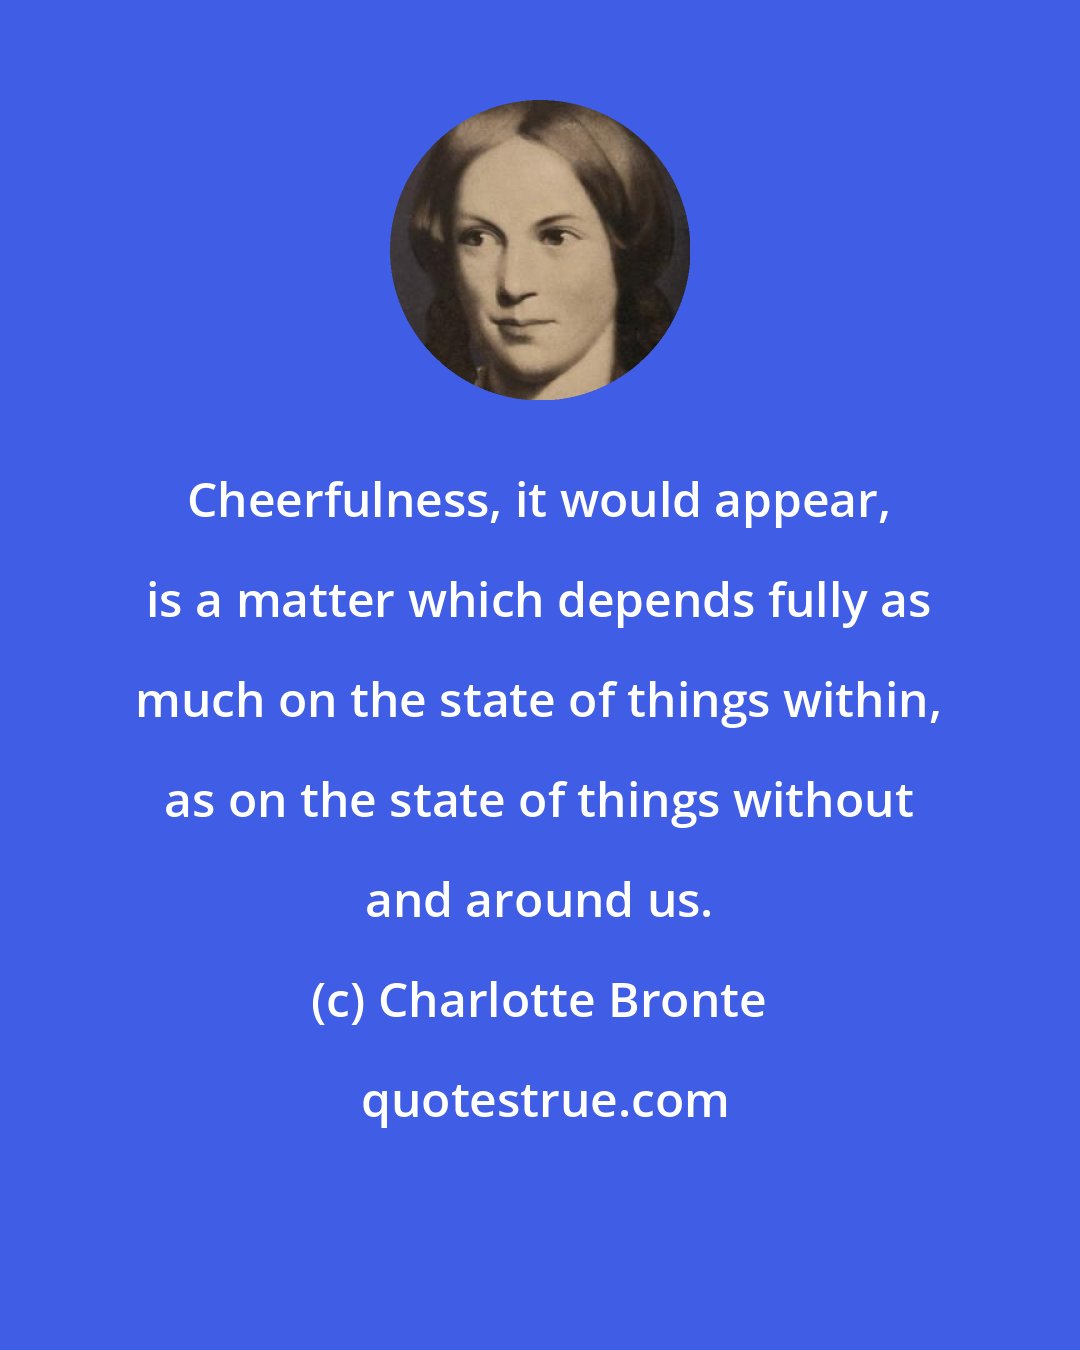 Charlotte Bronte: Cheerfulness, it would appear, is a matter which depends fully as much on the state of things within, as on the state of things without and around us.